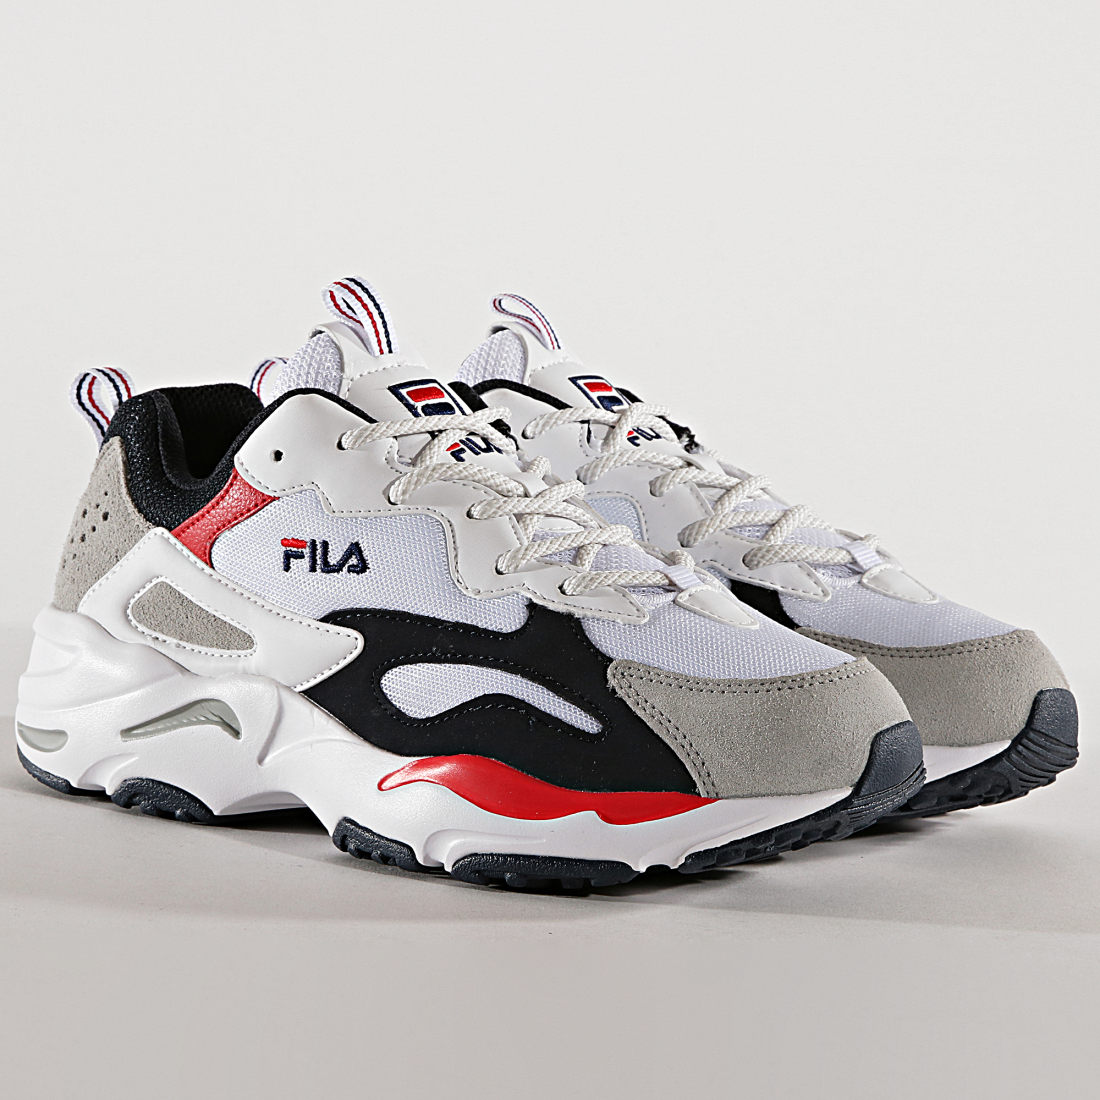 fila ray tracer homme 2019